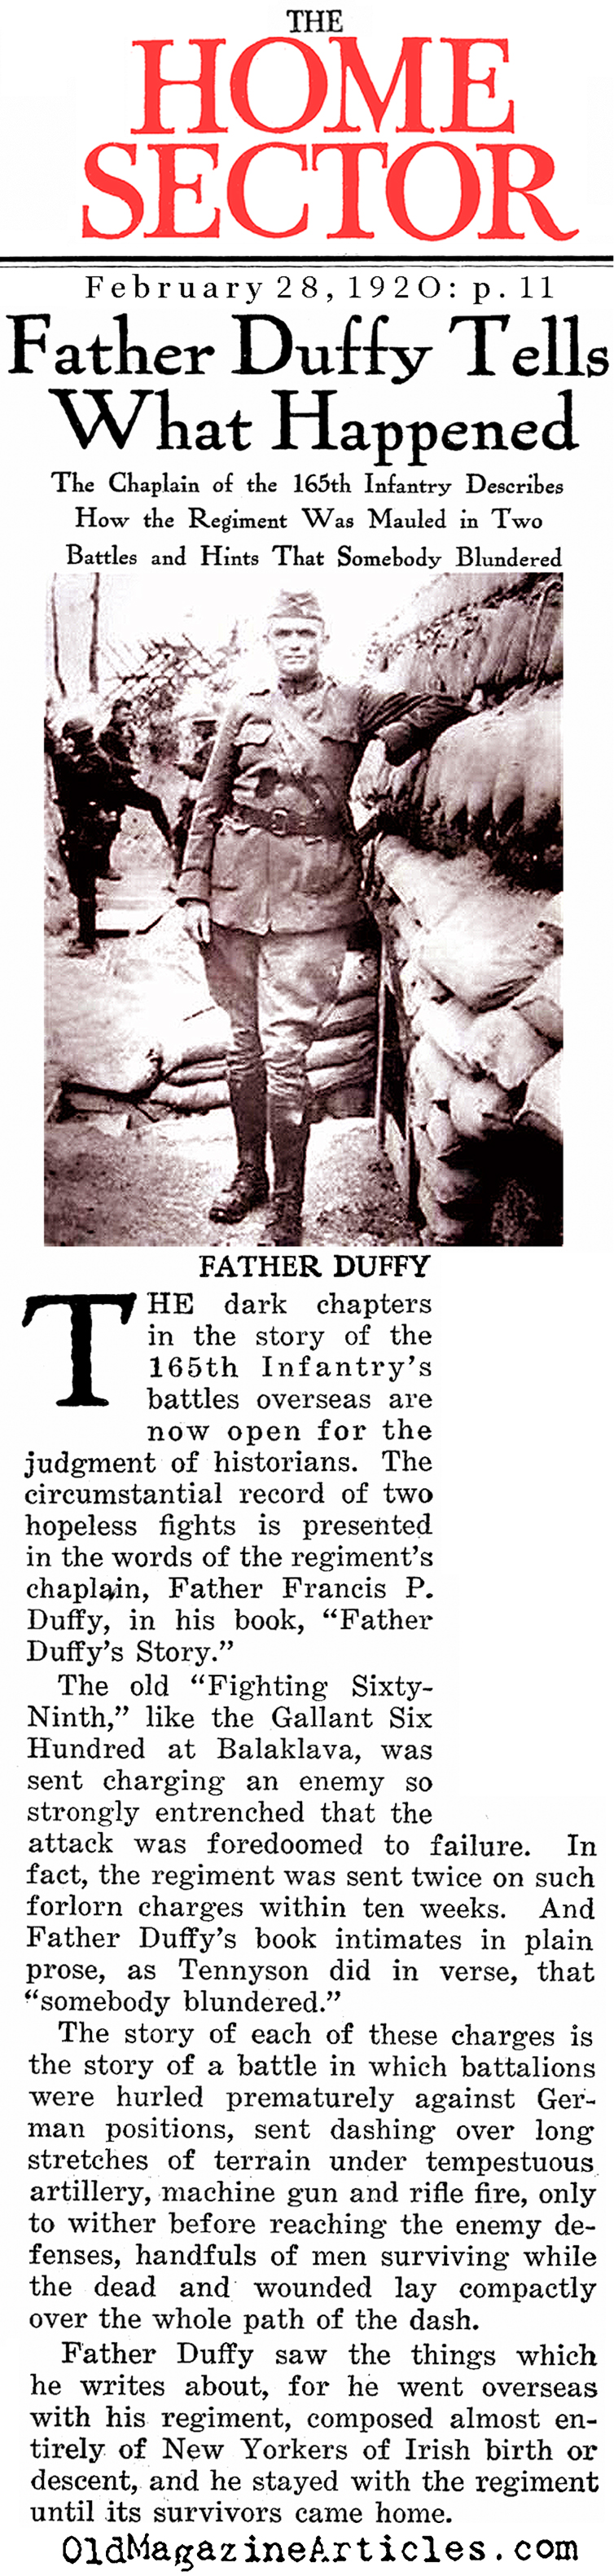 ''Father Duffy Tells What Happened'' (The Home Sector, 1920)